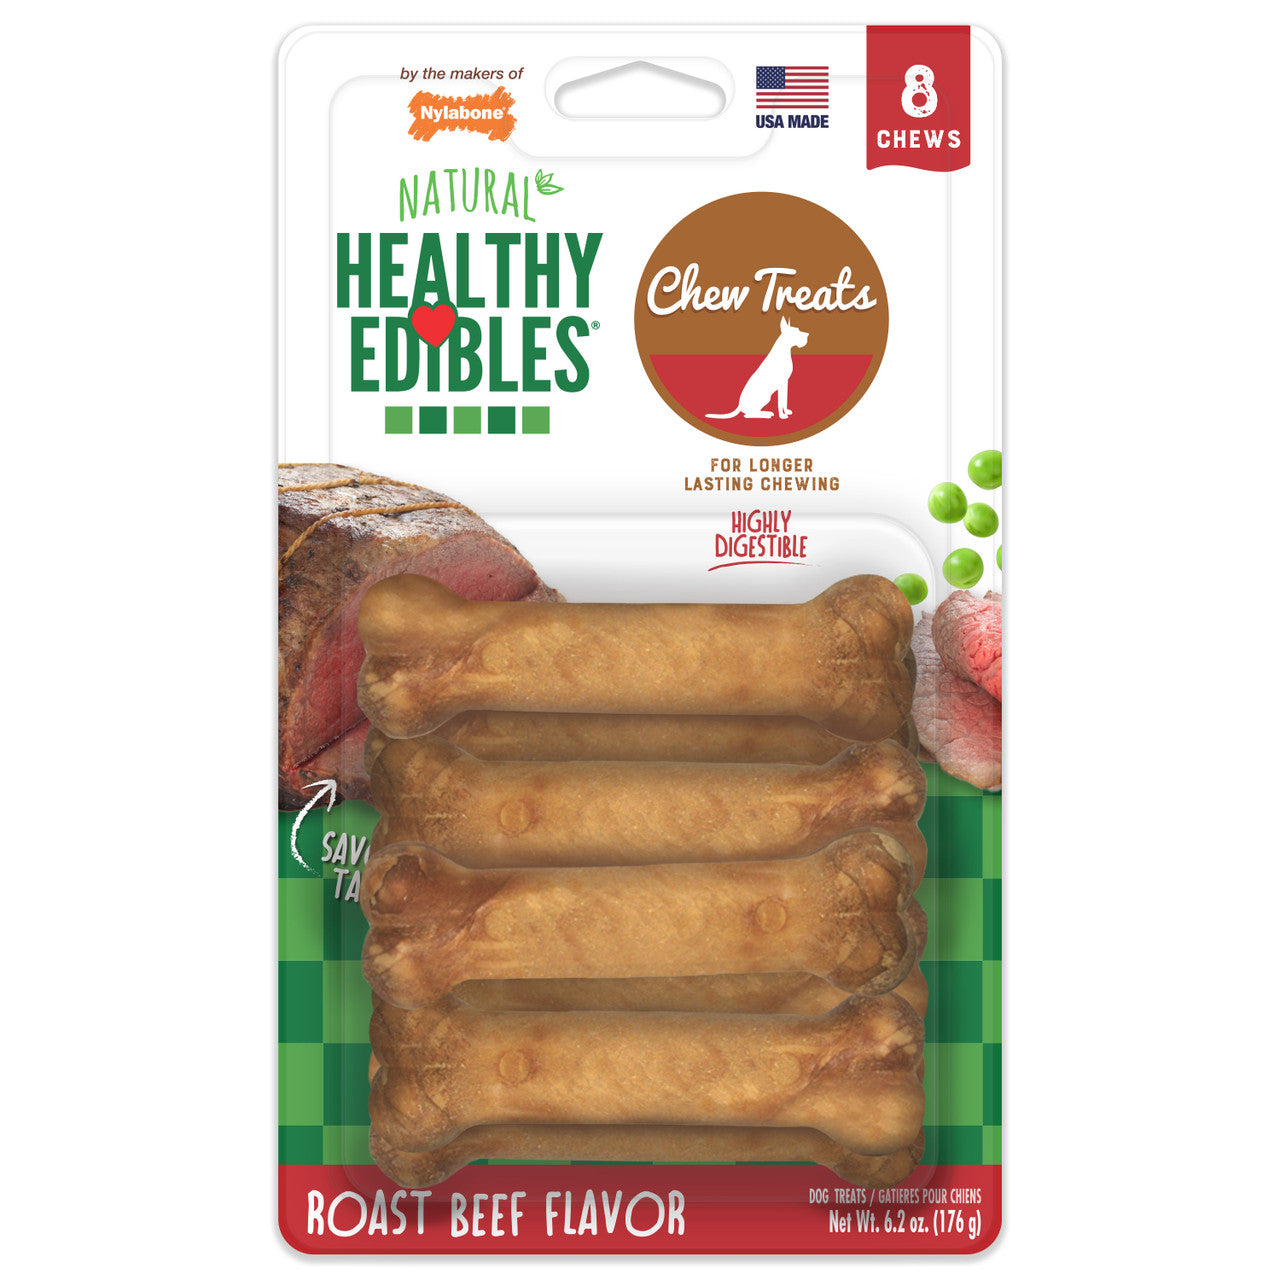 Nylabone Healthy Edibles Roast Beef Flavor Chew Treats for Dog 8 Count X-Small/Petite